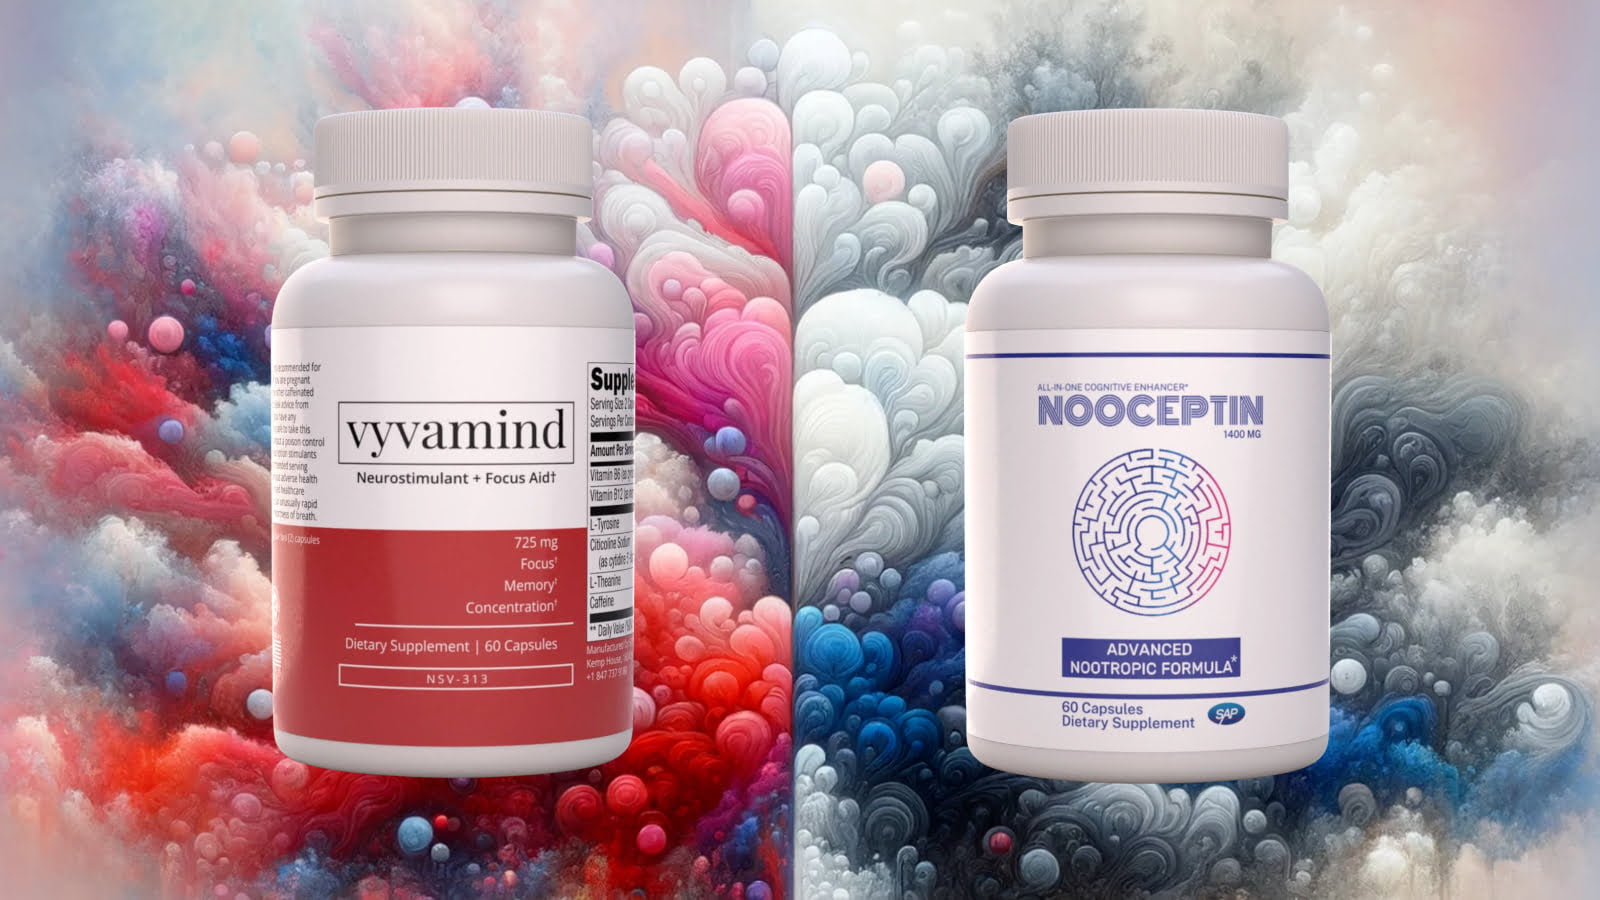 Comparing Vyvamind and Nooceptin's effects on cognitive enhancement.